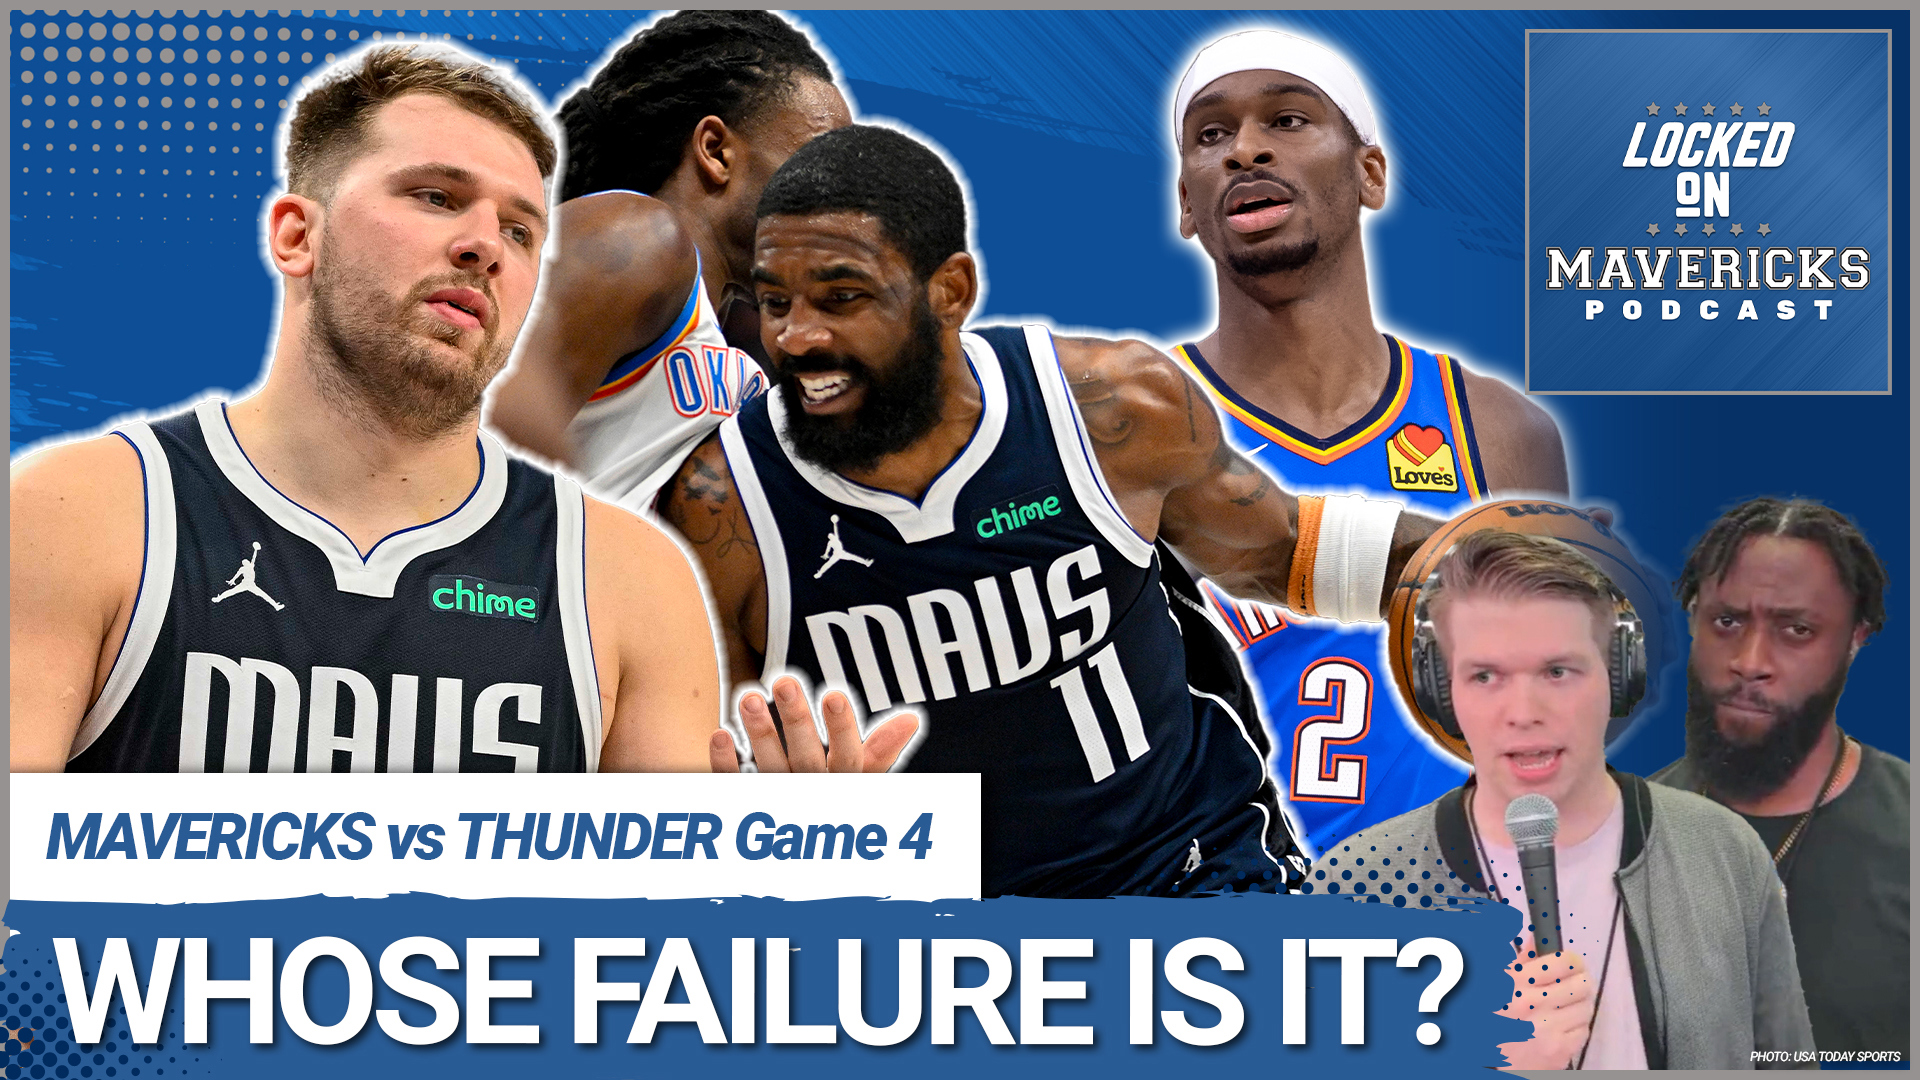 Nick Angstadt & Reggie Adetula breakdown why the Dallas Mavericks lost in Game 4 against the OKC Thunder and why Luka Doncic & Kyrie Irving didn't give enough.